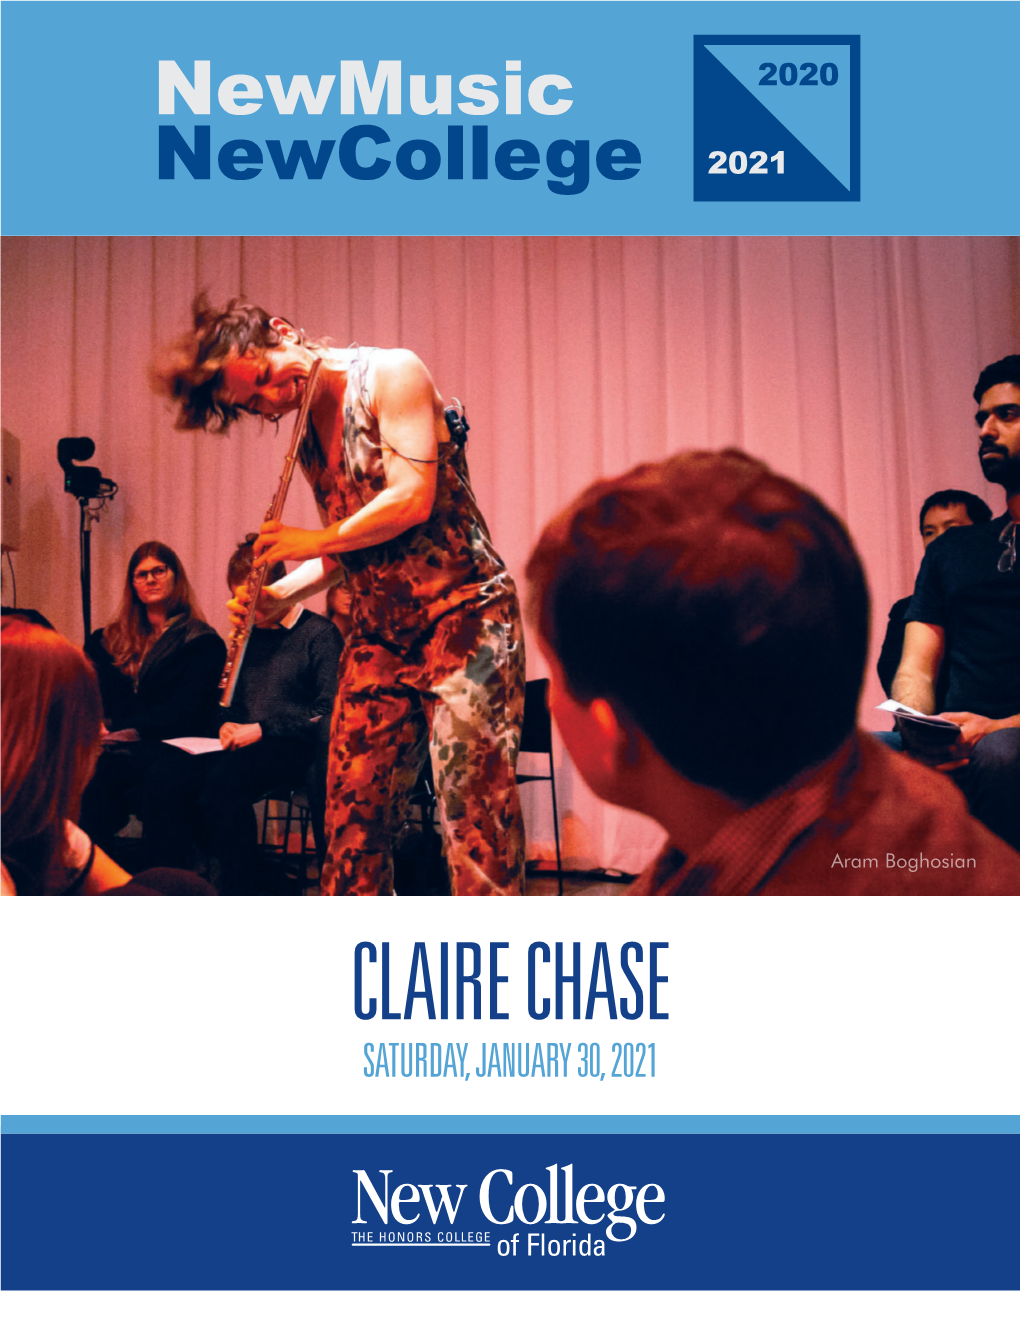 CLAIRE CHASE SATURDAY, JANUARY 30, 2021 Newmusicnewcollege